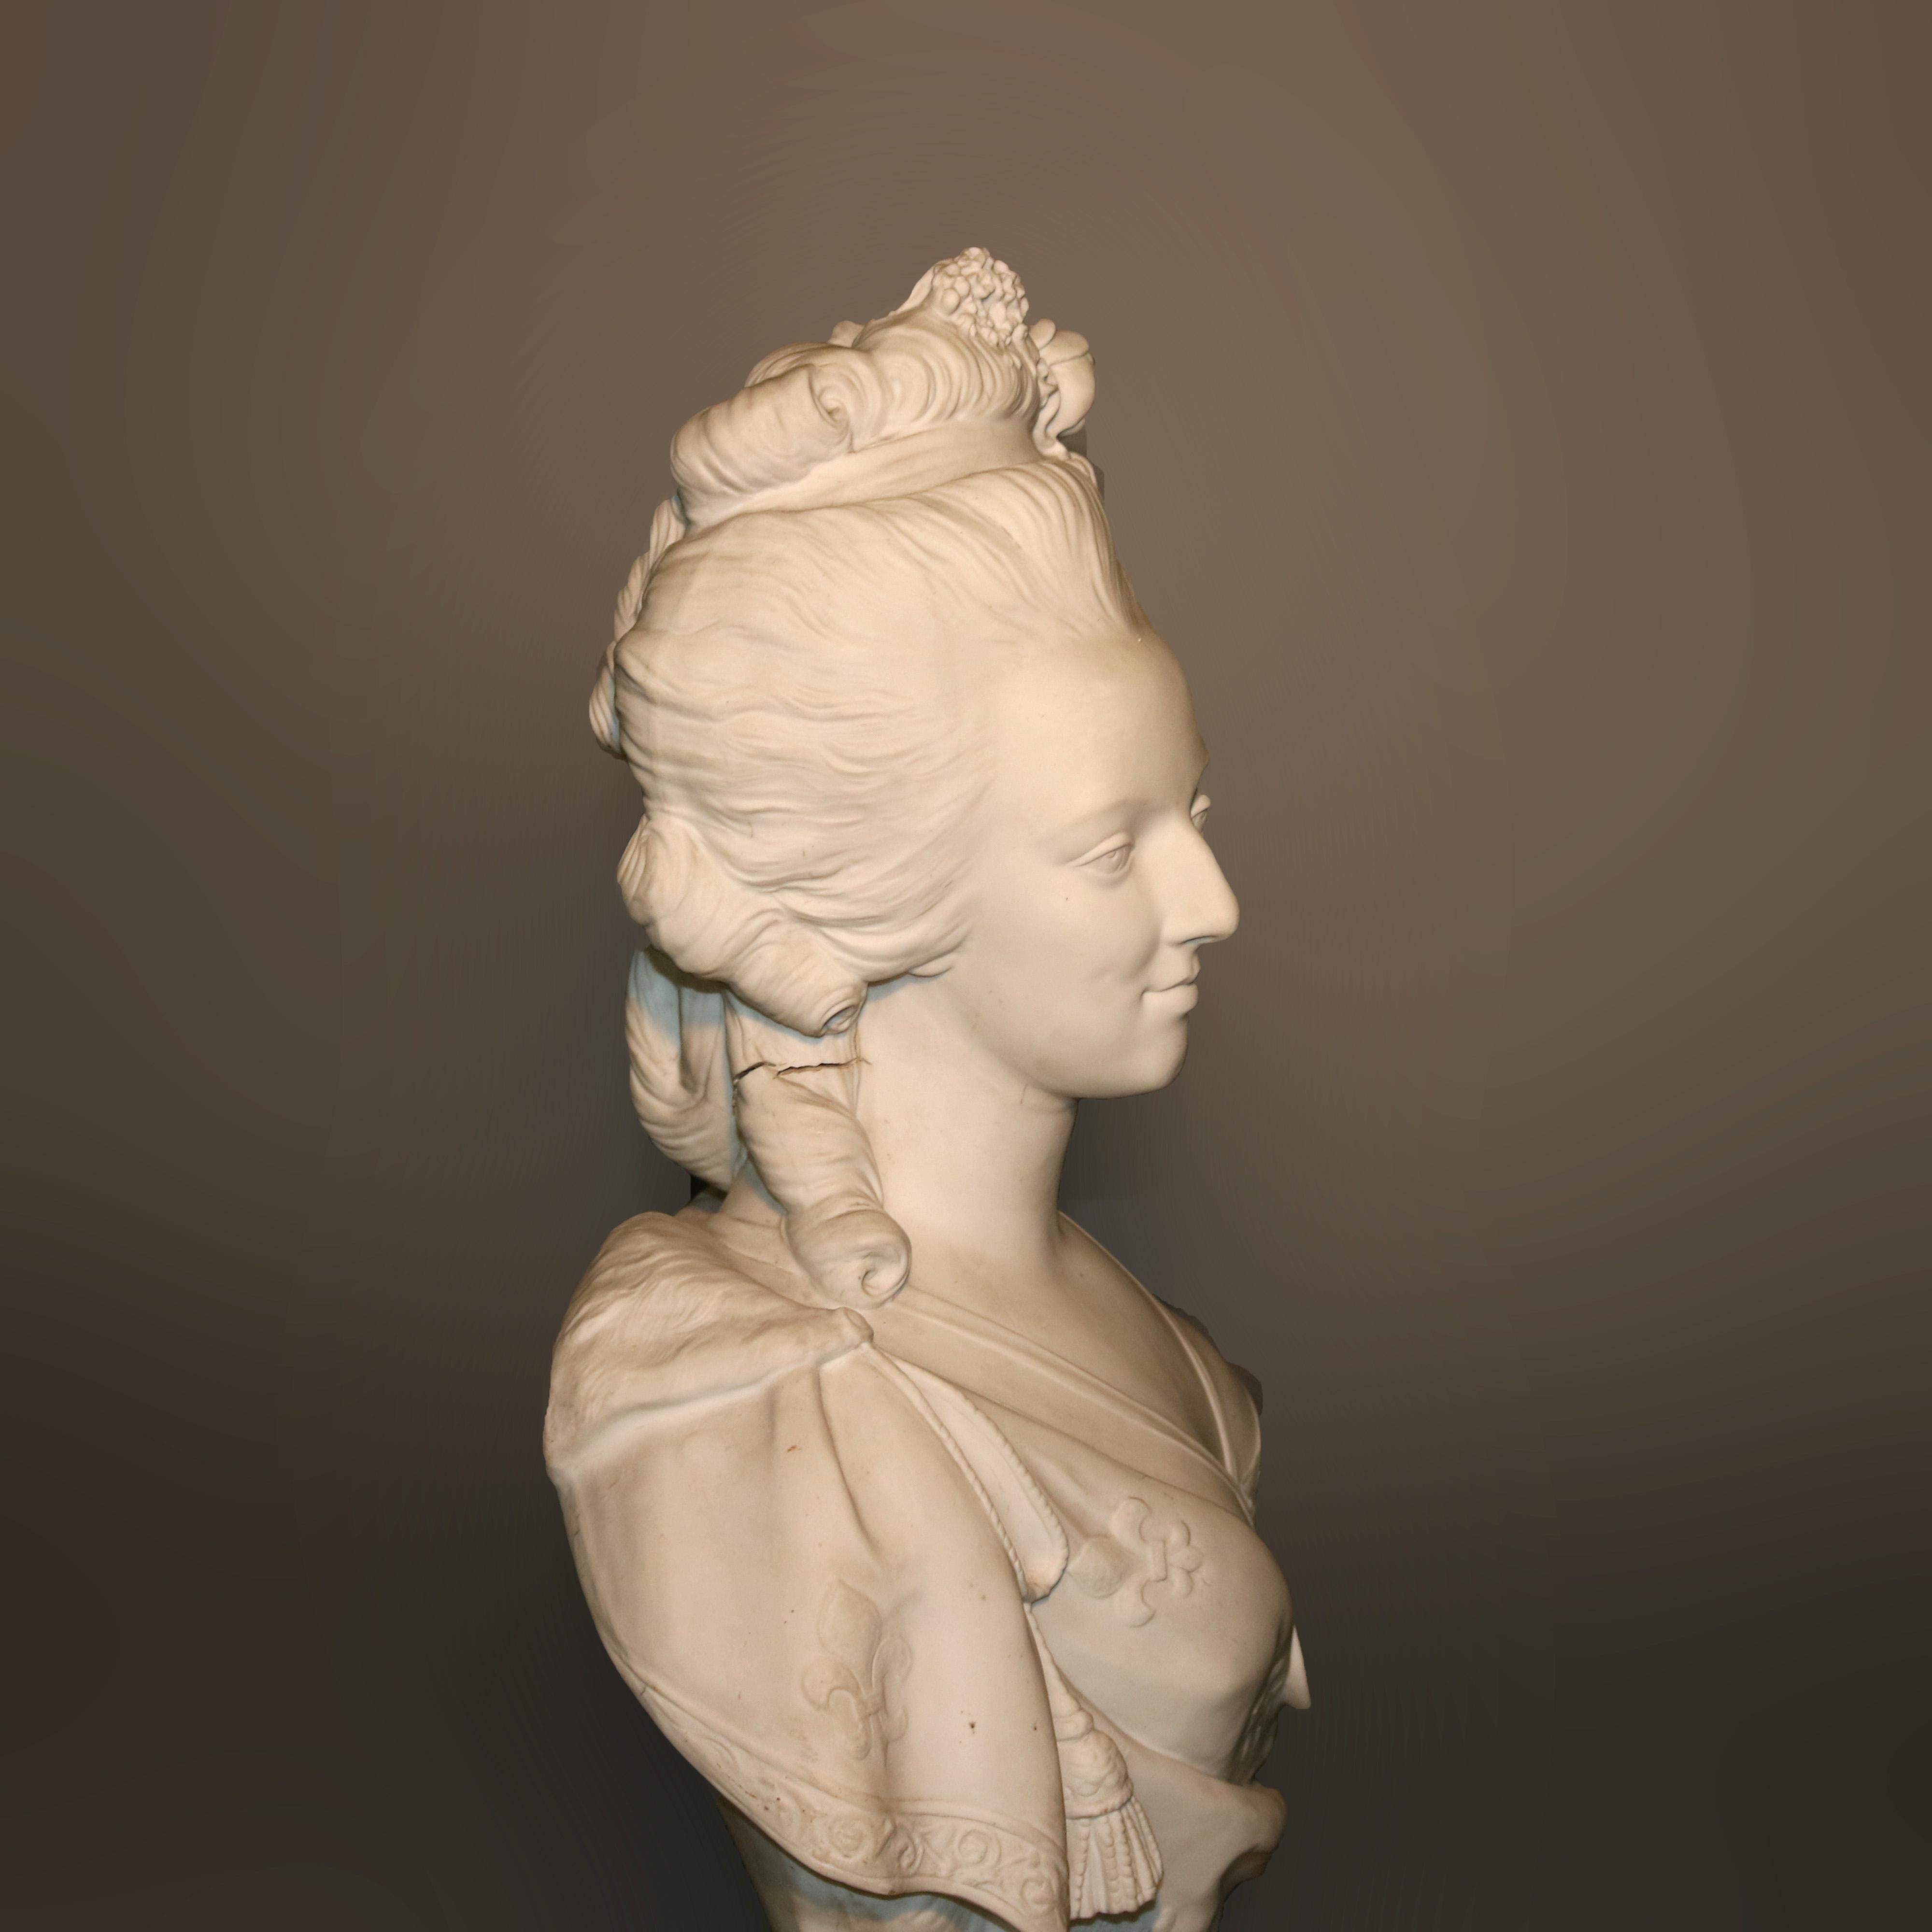 19th Century Antique Oversized Parian Bust of Marie Antoinette after Raphael Jacquemin 19th C